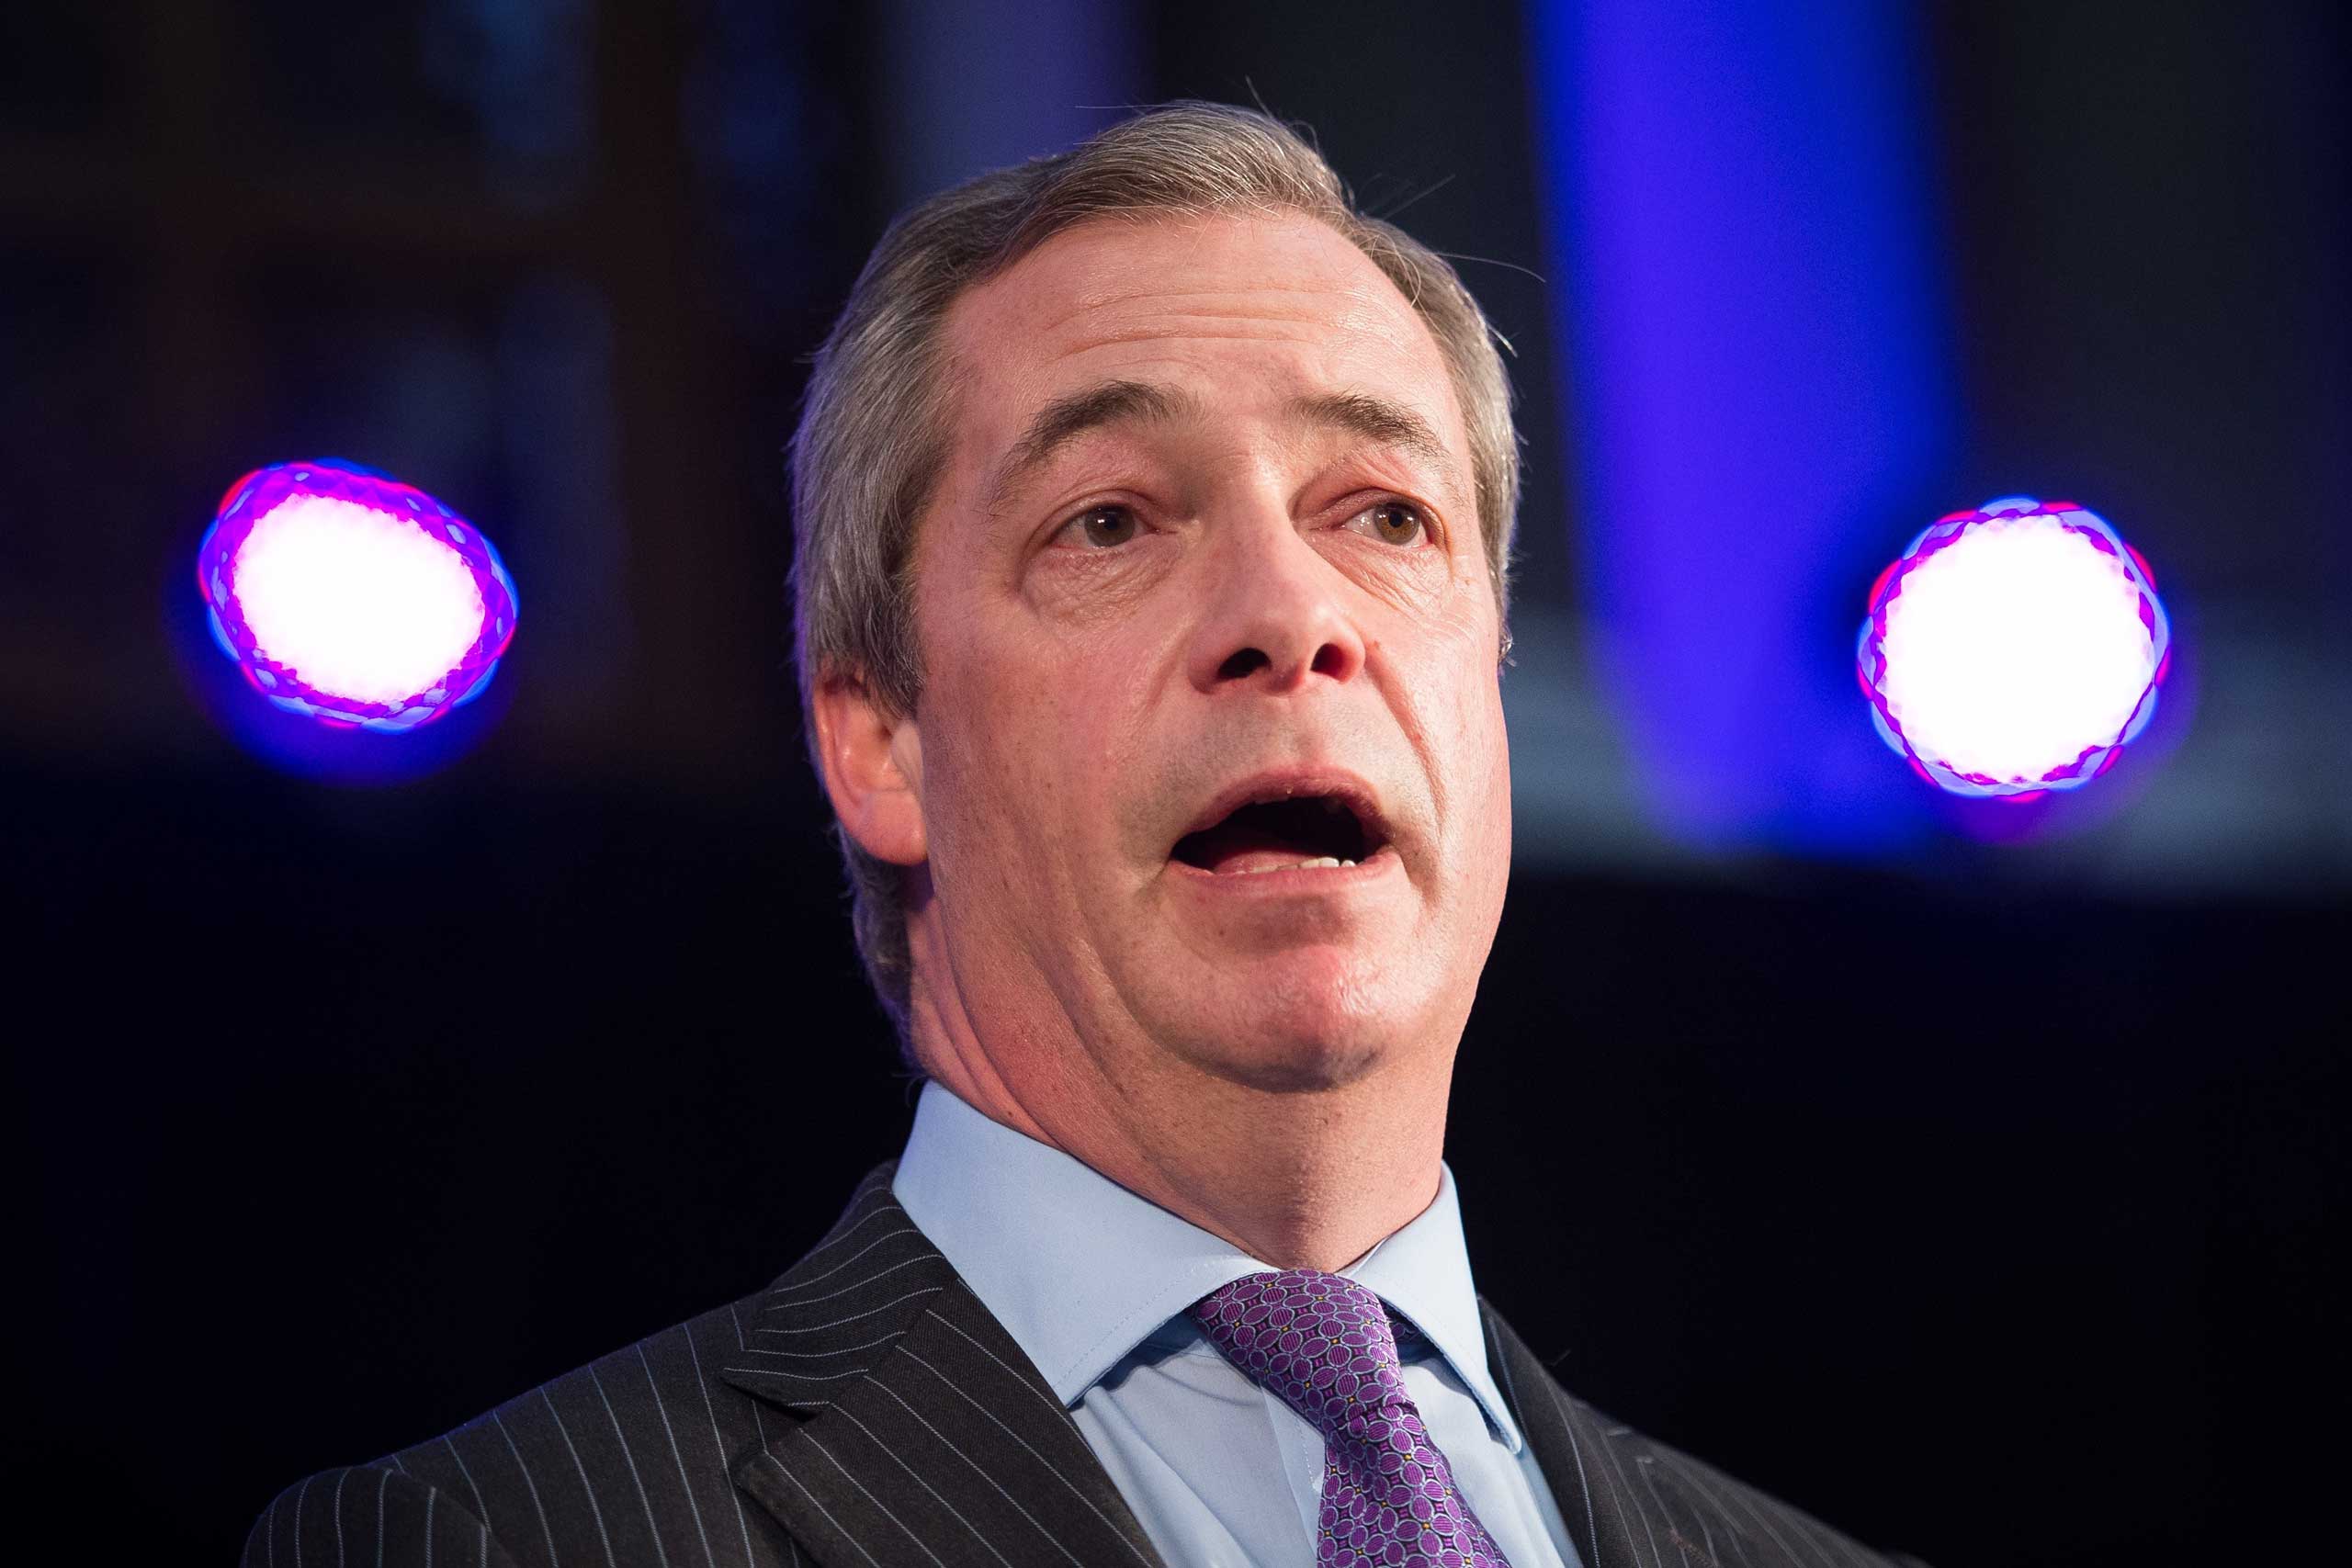 United Kingdom Independence Party (UKIP) leader Nigel Farage addresses supporters and media personnel in central London on March 4, 2015.